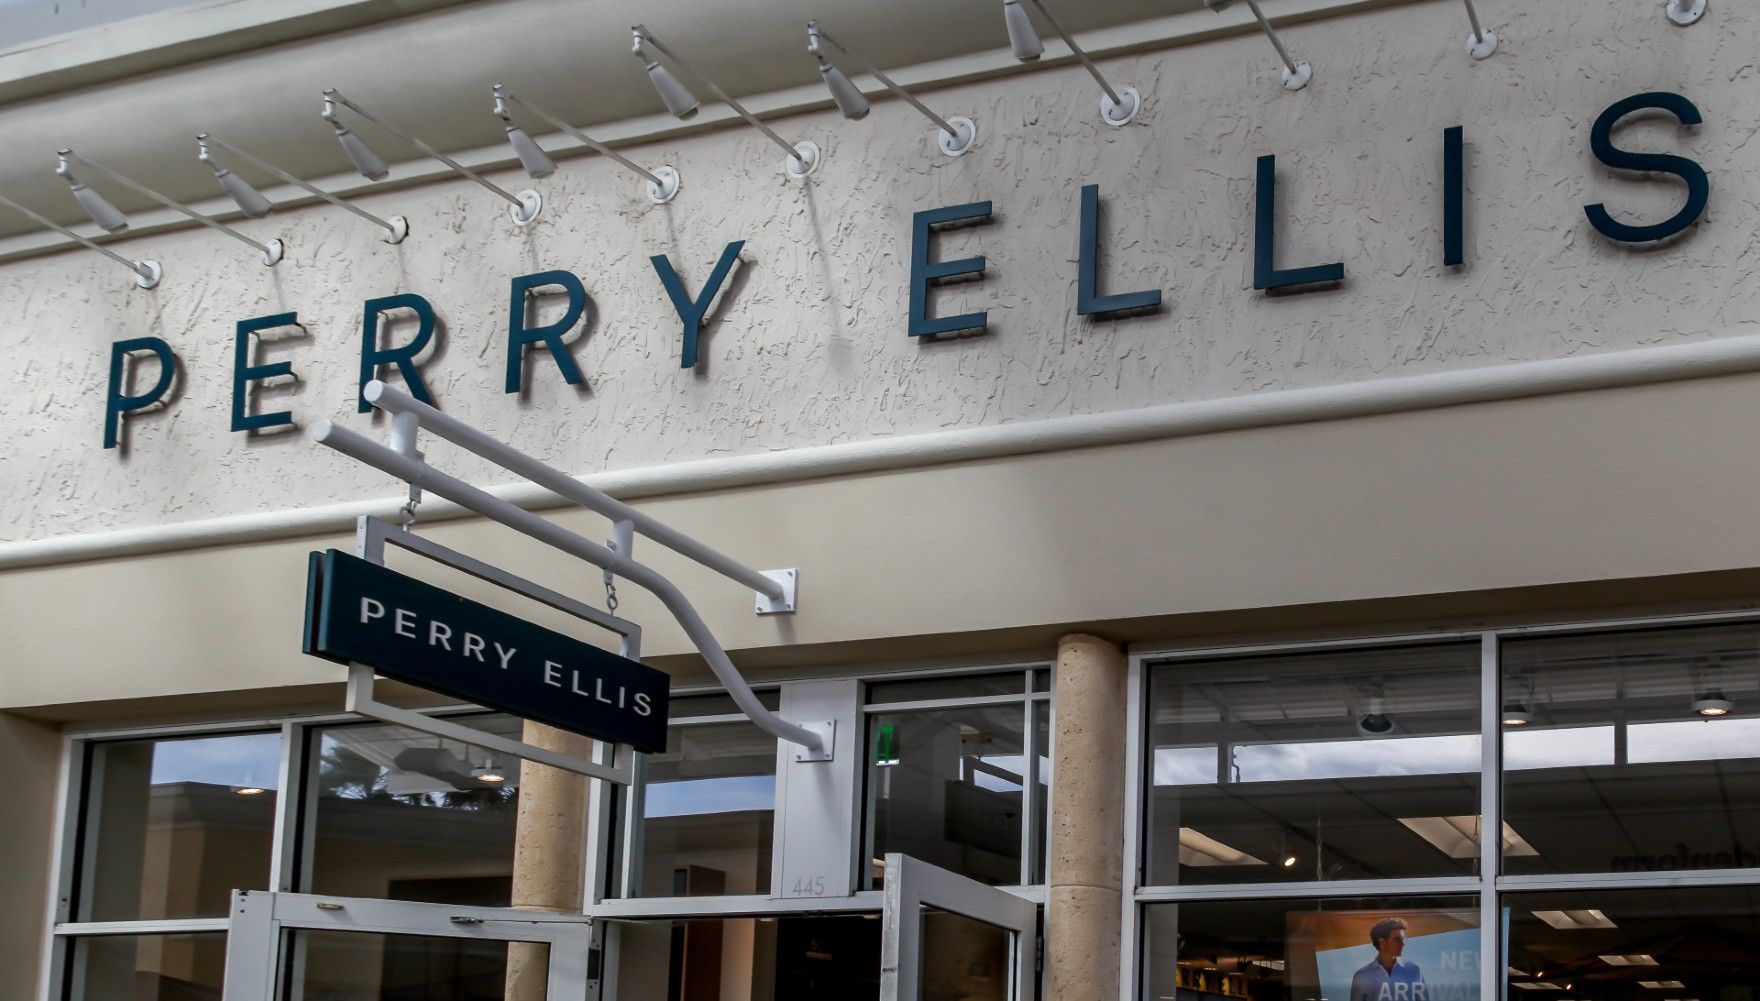 Perry Ellis Falsely Advertises Pima Cotton Clothing, Claims Class Action  Lawsuit - Top Class Actions